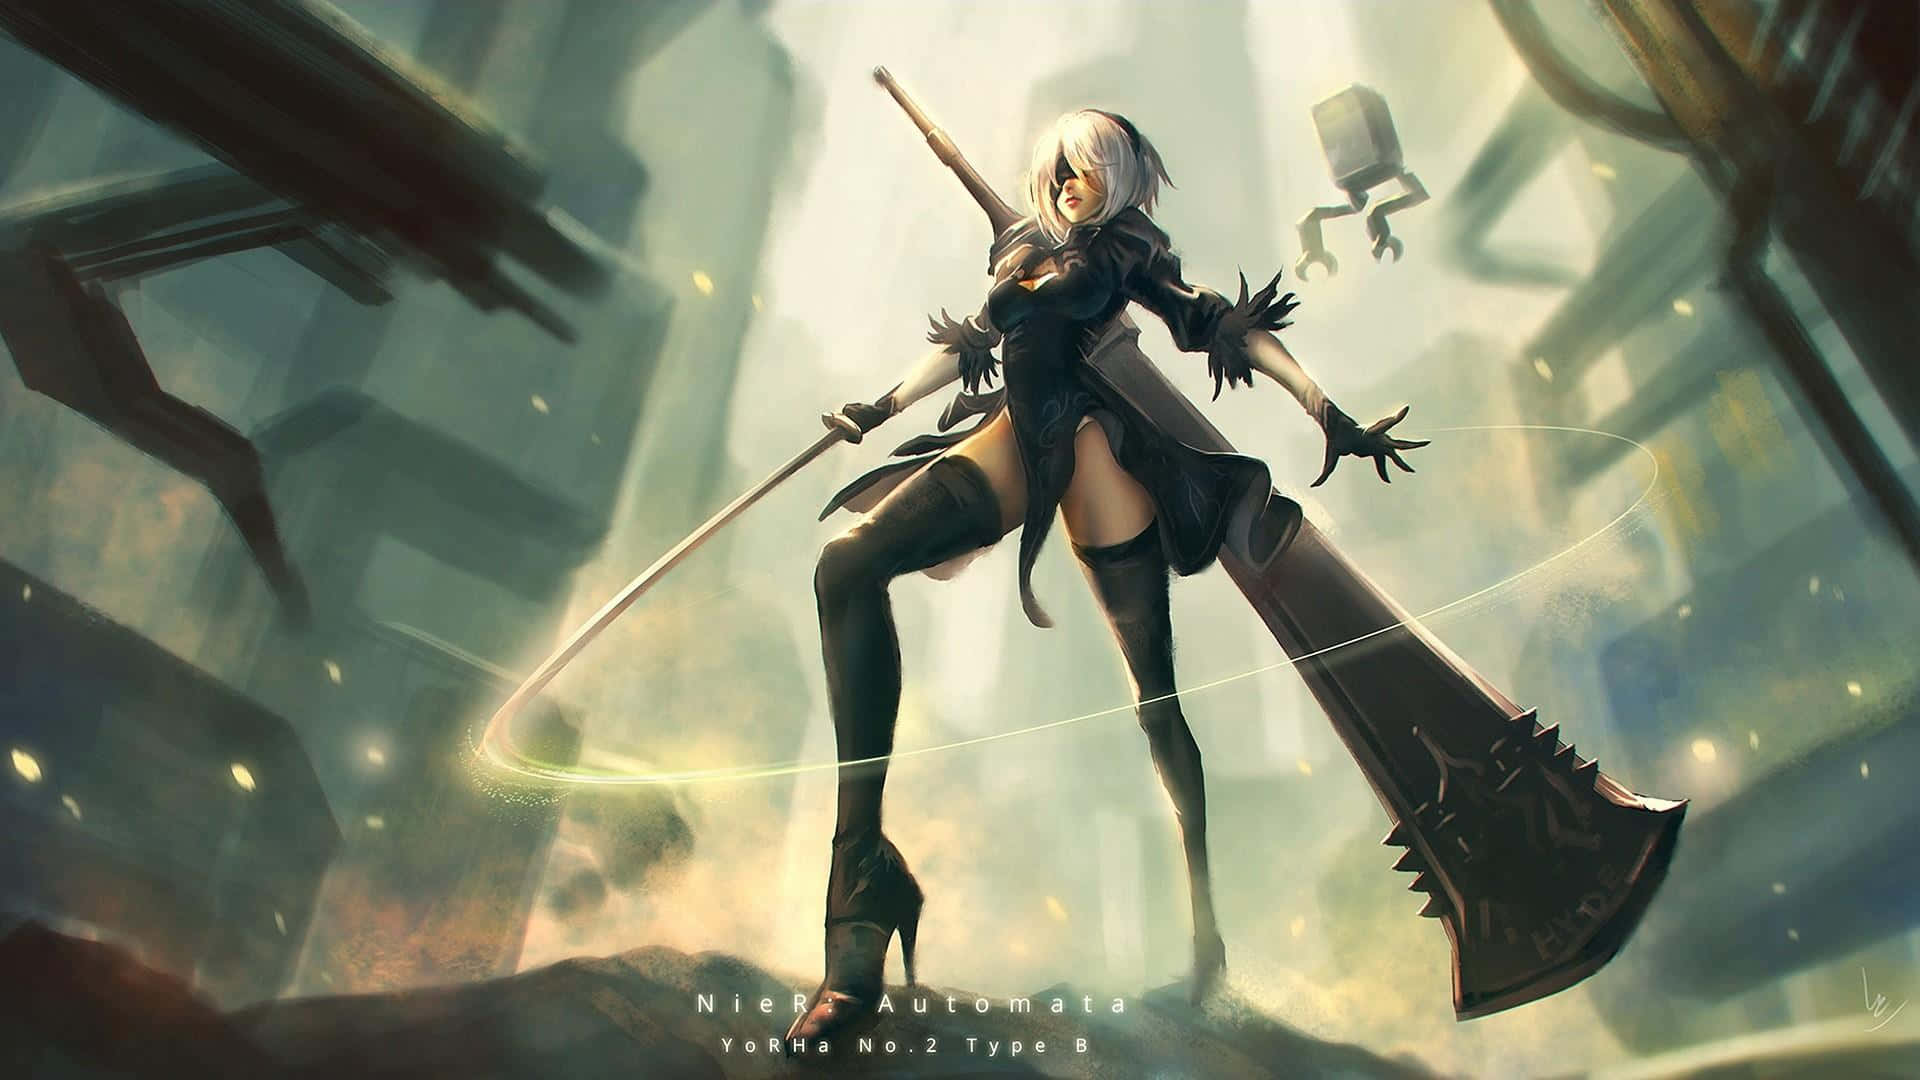 2B, the Female android from NieR: Automata